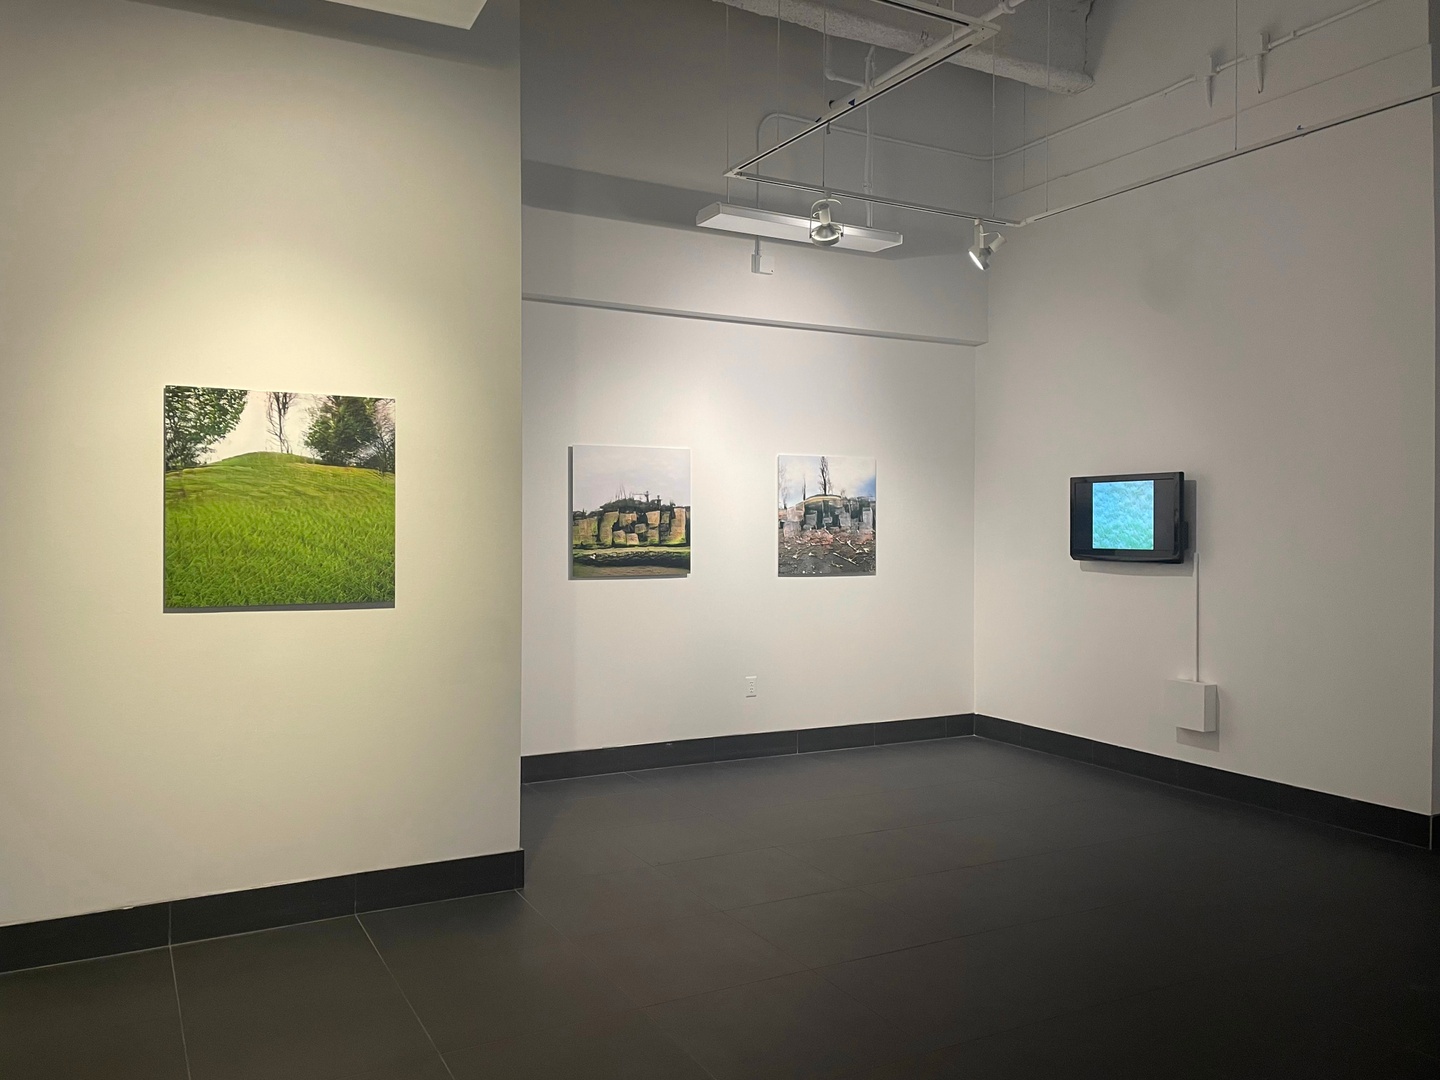 Gallery installation featuring three photographic prints on the walls plus a digital monitor with work.